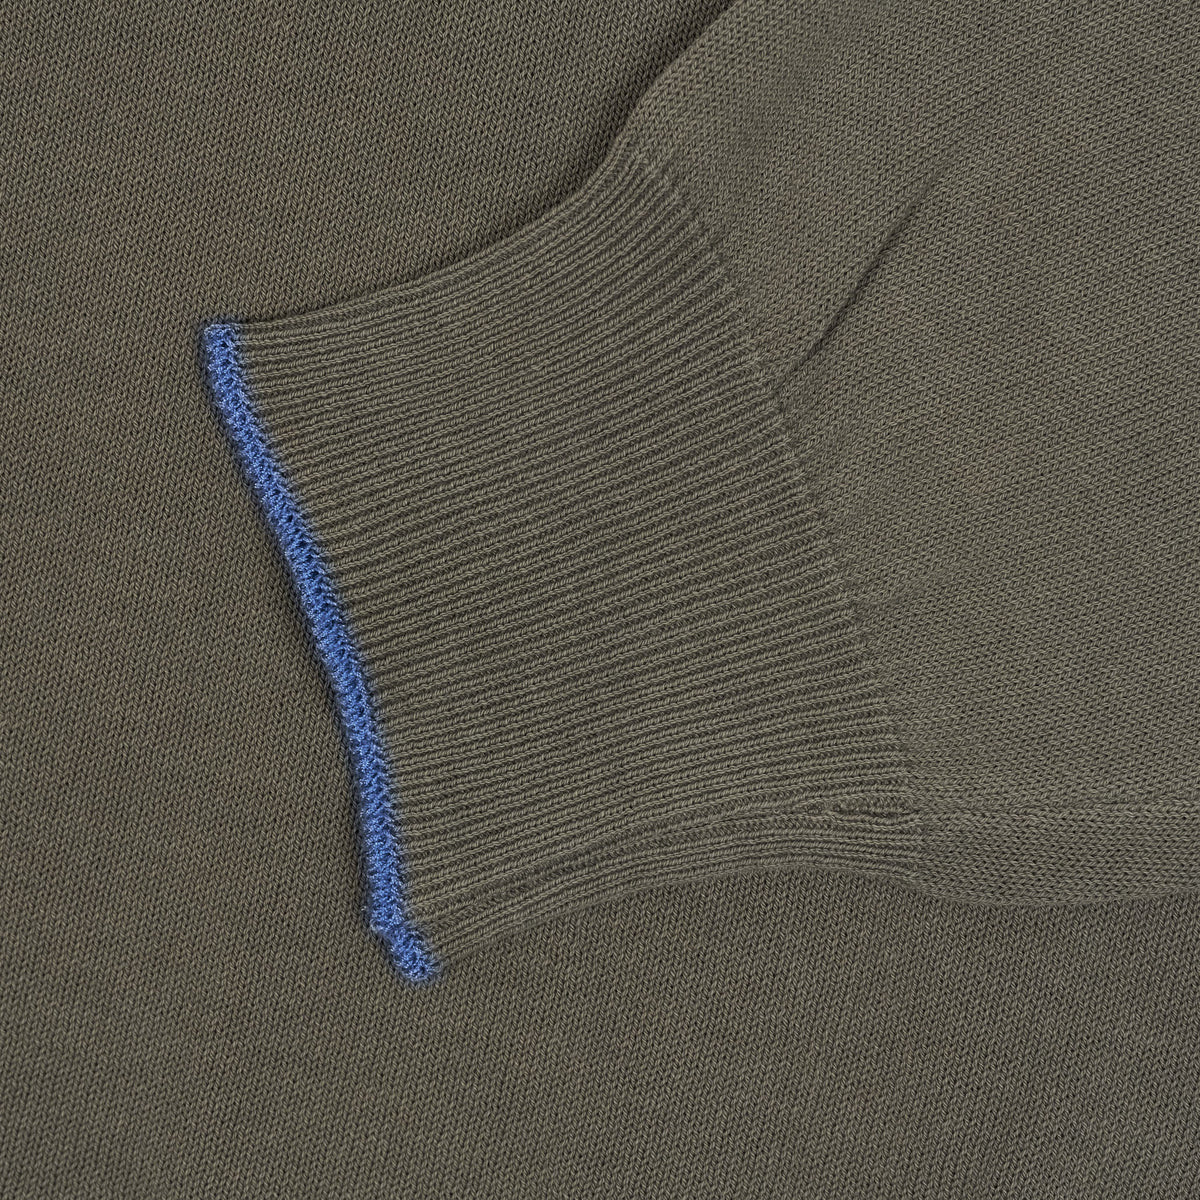 Gran Sasso Crew Neck Knitted Cotton Pullover With Elbow Reinforcement